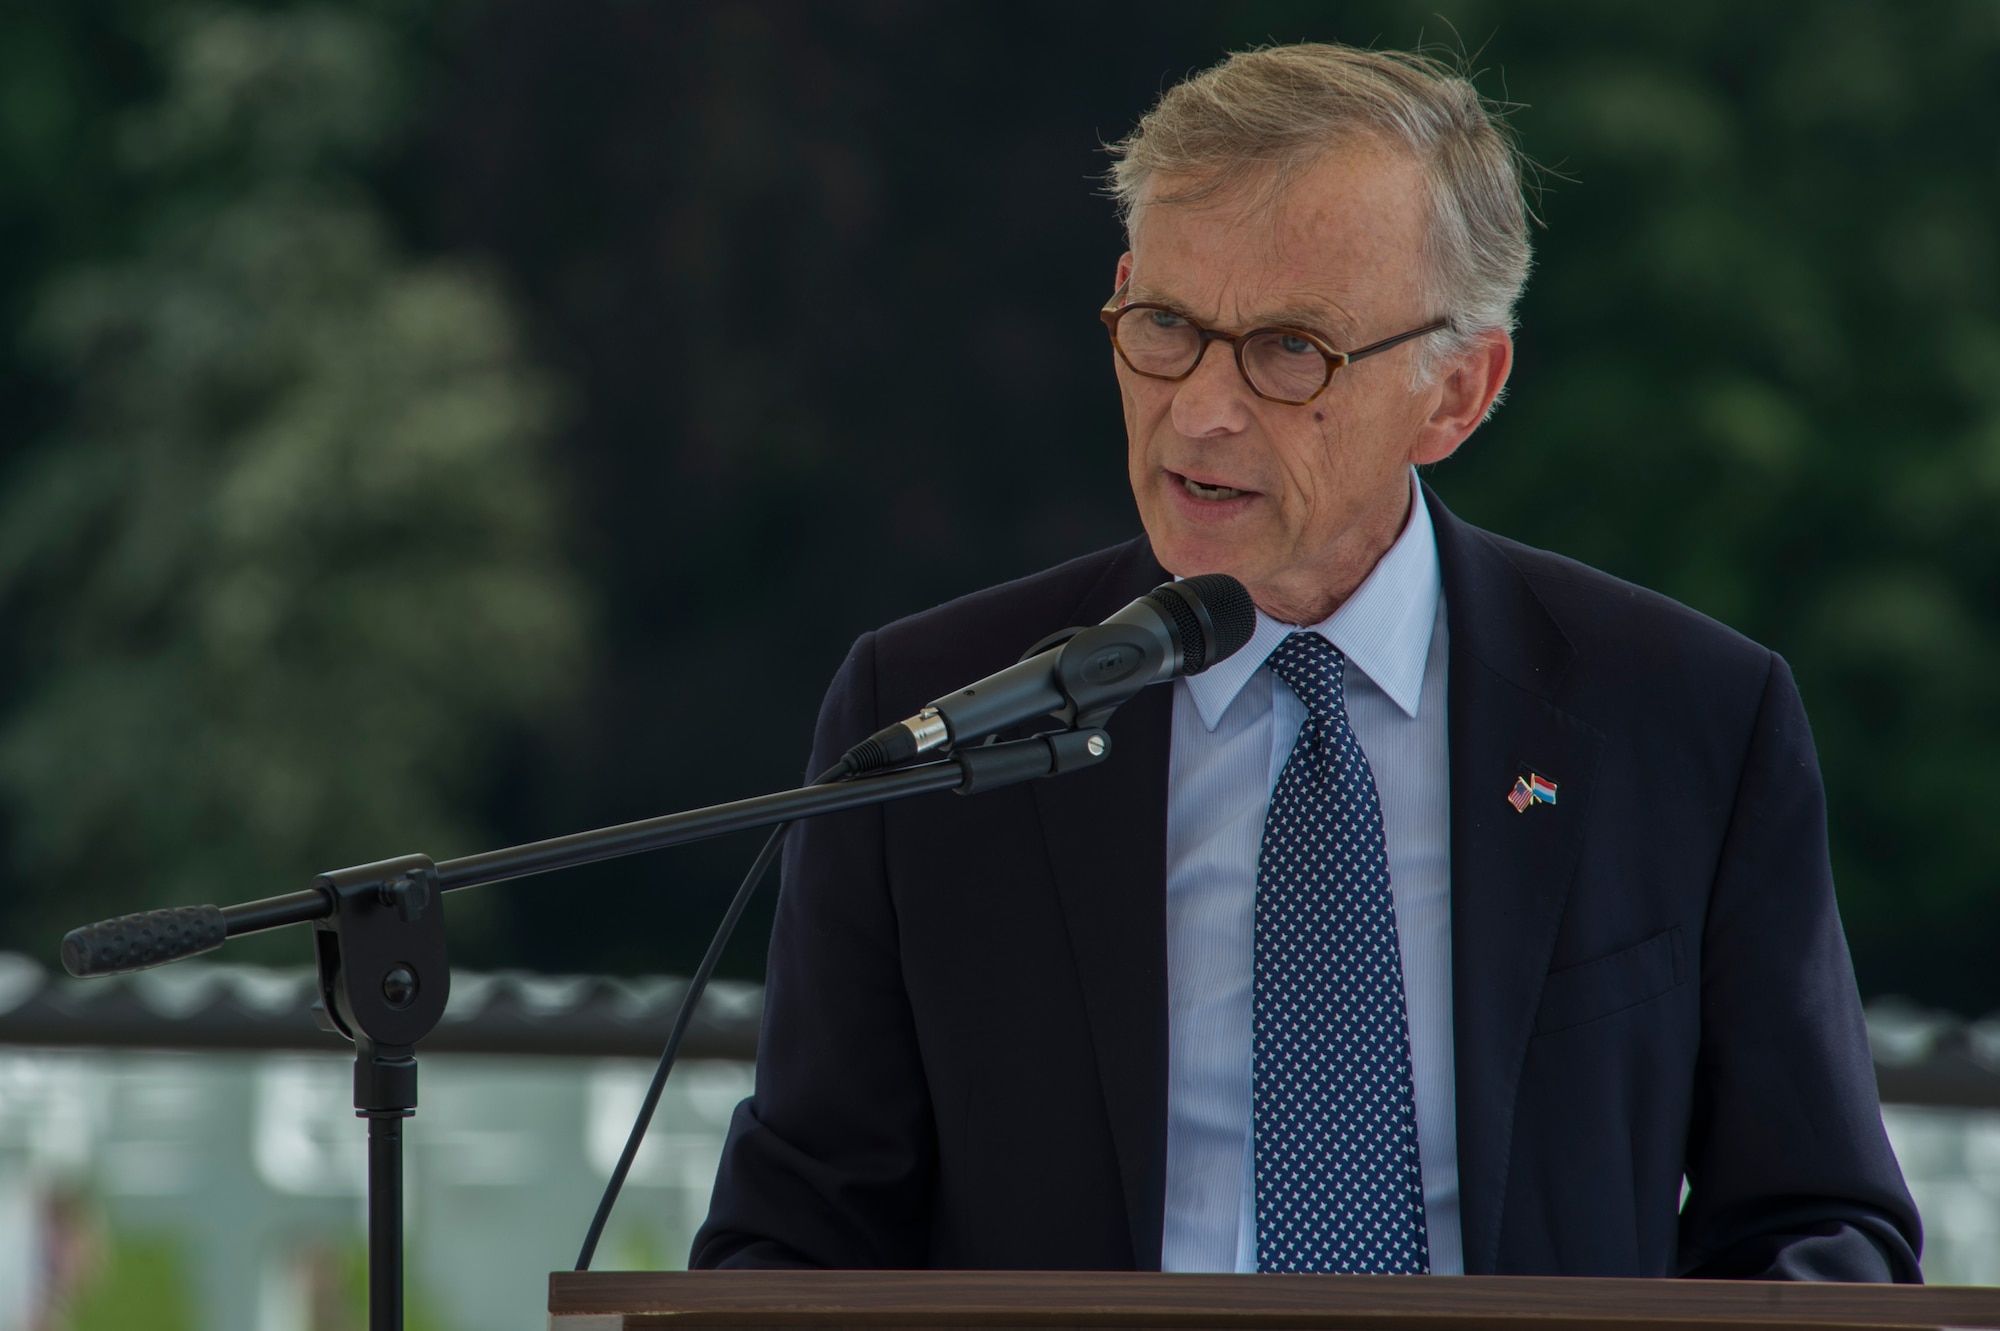 David McKean, U.S. ambassador to Luxembourg, speaks during a Memorial Day ceremony at the Luxembourg American Cemetery and Memorial in Luxembourg, May 28, 2016. The first official Memorial Day observance occurred at Arlington National Cemetery May 30, 1868, to honor and decorate the graves of those who died during the Civil War. (U.S. Air Force photo by Staff Sgt. Joe W. McFadden/Released)  